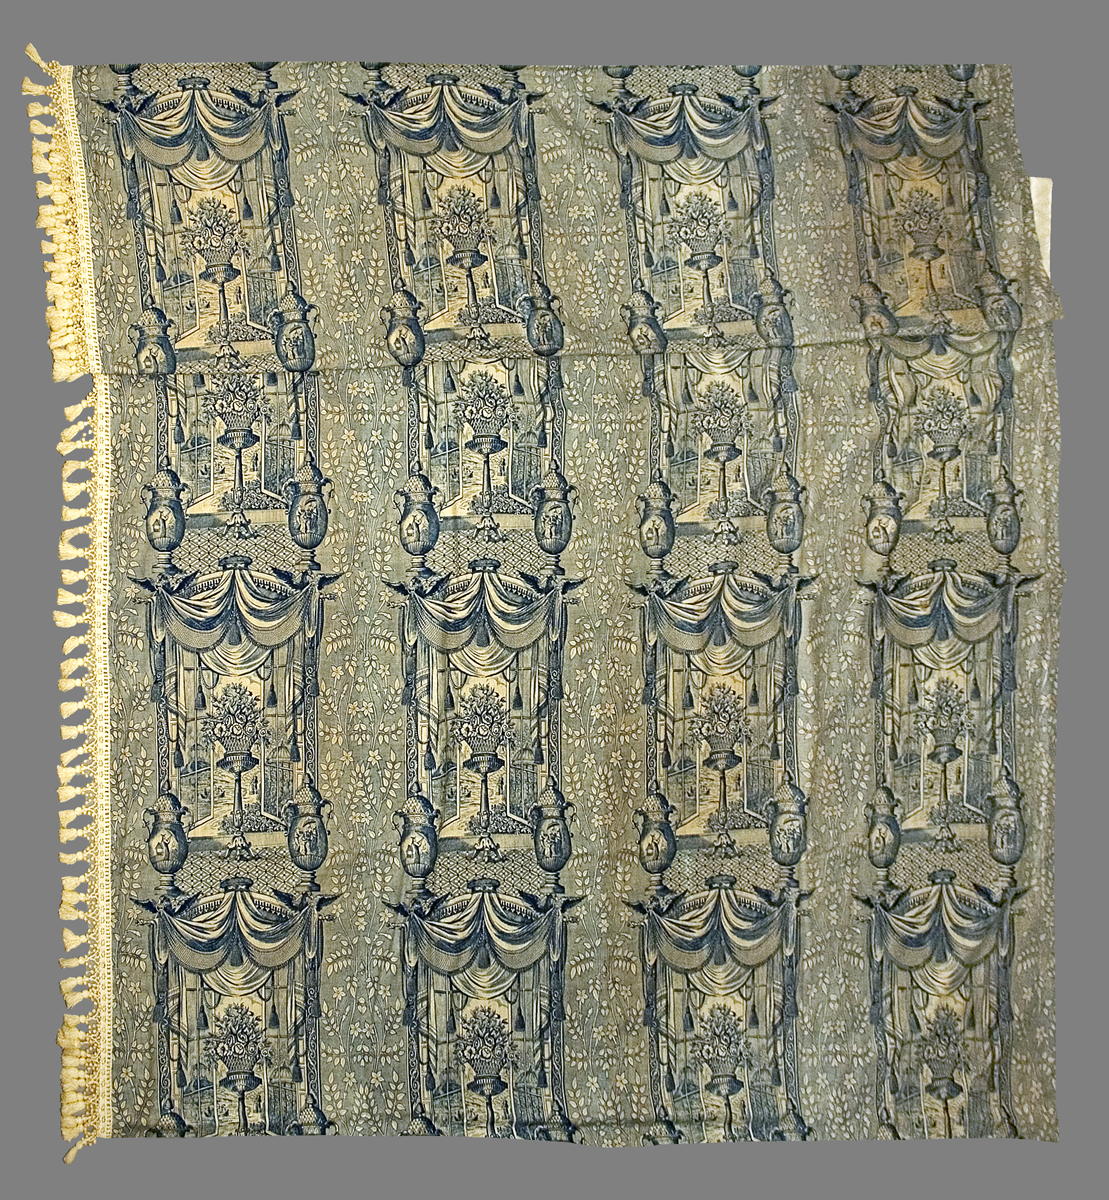 Textiles (Furnishing) - Bedcover